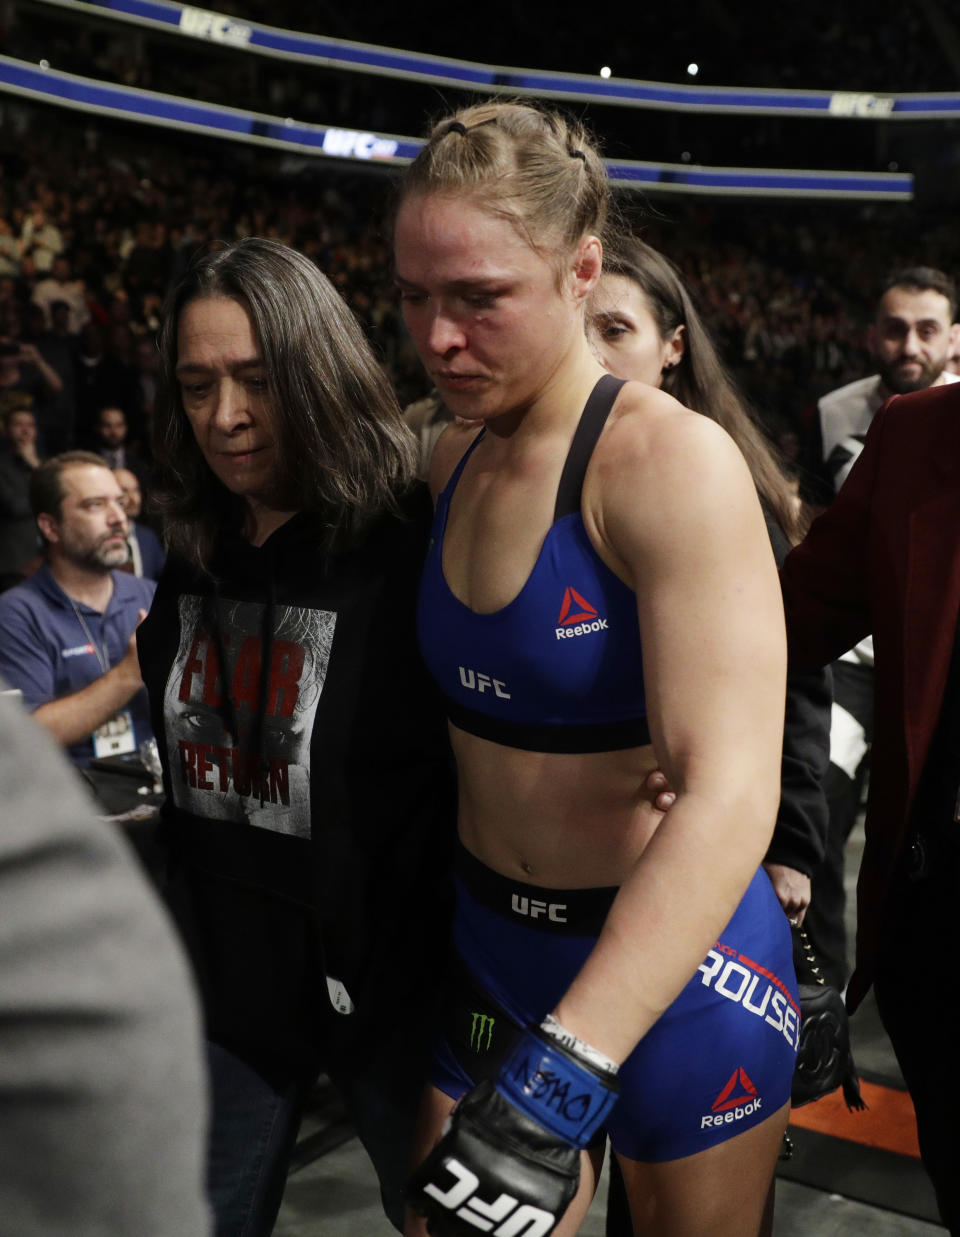 Ronda Rousey leaves the octagon after losing to Amanda Nunes in the first round of their women's bantamweight championship mixed martial arts bout at UFC 207, Friday, Dec. 30, 2016, in Las Vegas. Nunes won the fight after it was stopped in the first round. (AP Photo/John Locher)